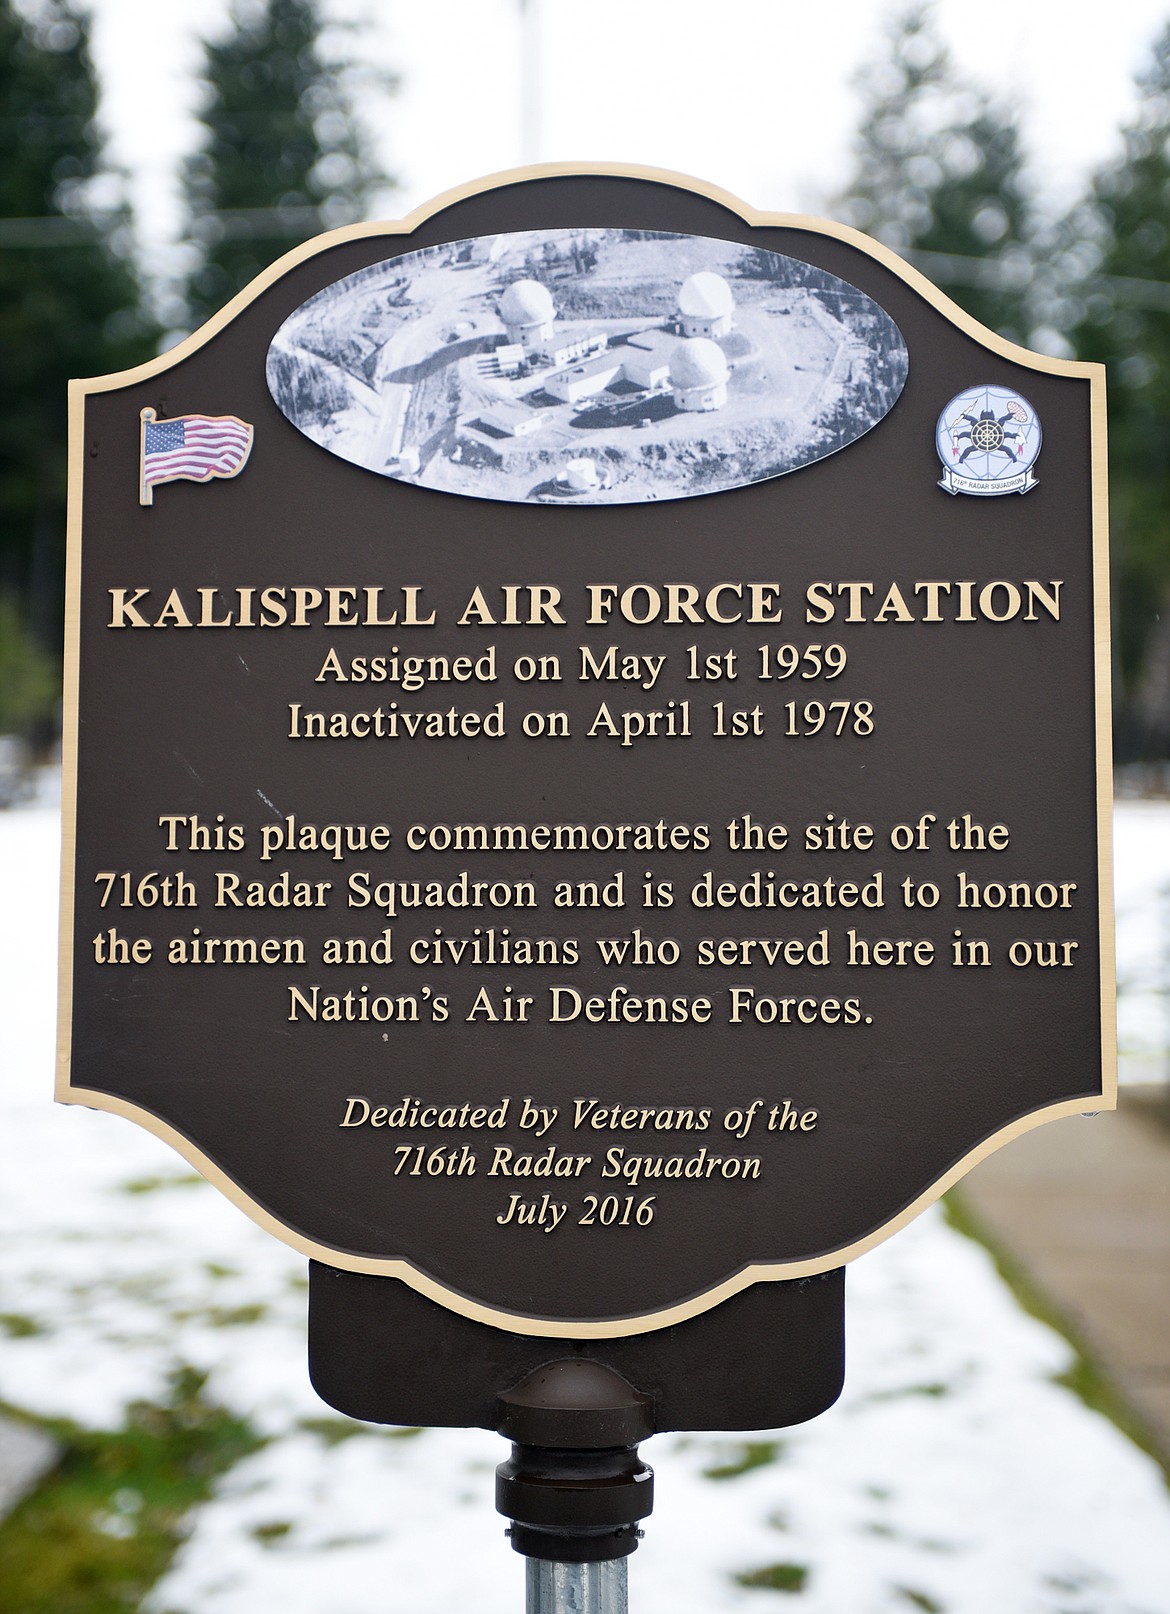 The Veterans of the 716th Radar Squadron dedicated a sign commemorating the Kalispell Air Force Station located in Lakeside. The station was active from May 1959 to April 1978. The station is the current home of Youth with a Mission.(Brenda Ahearn/Daily Inter Lake)